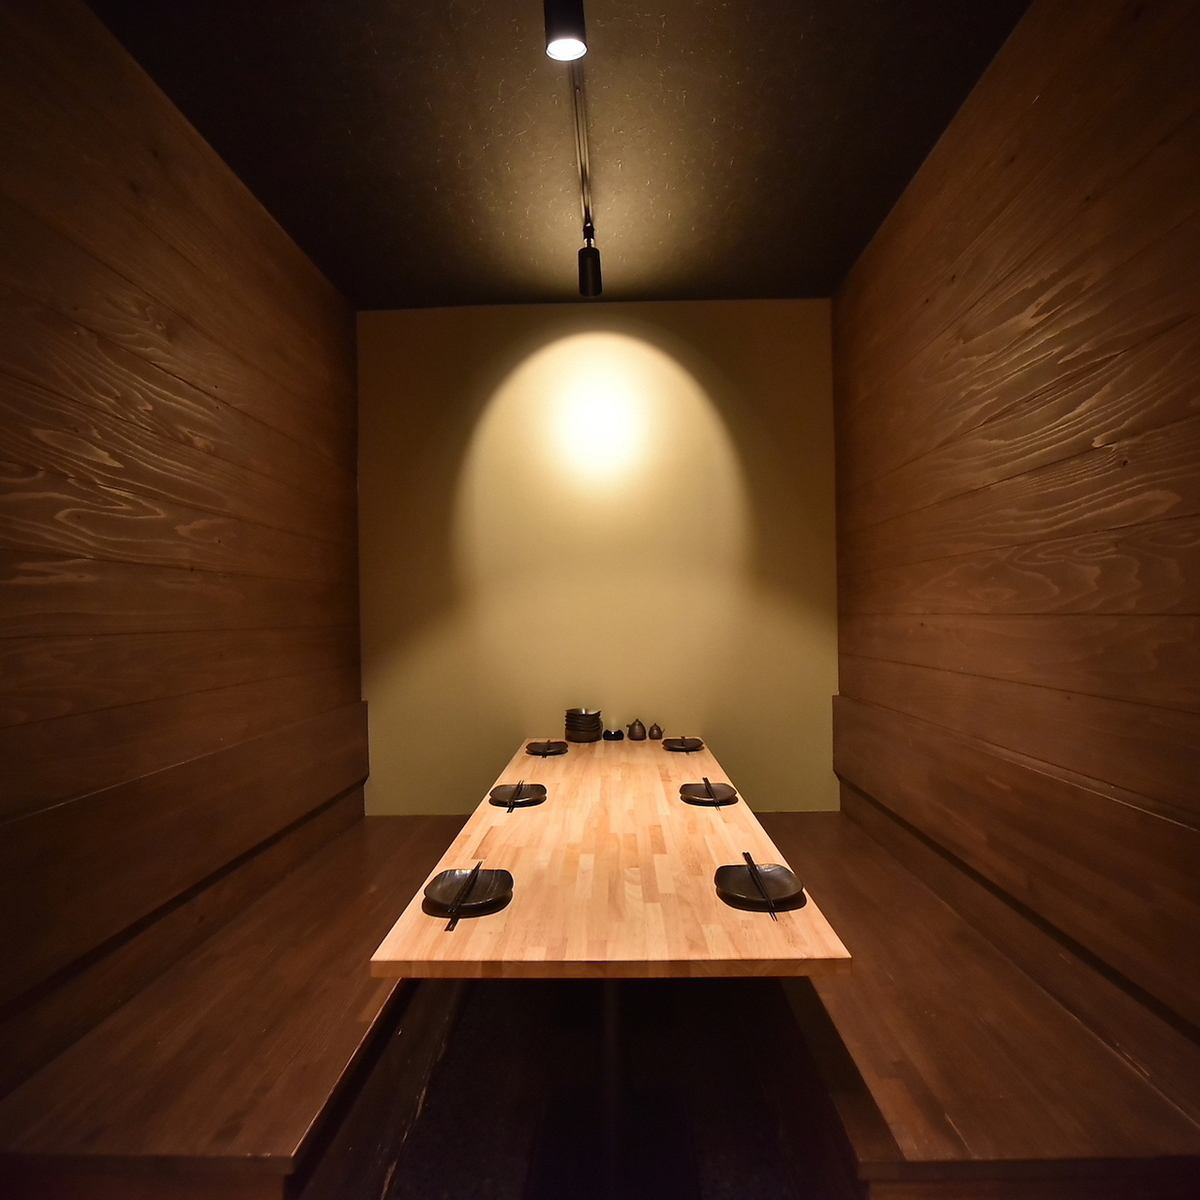 [Odawara x Private Room Izakaya] Many courses with abundant all-you-can-drink ♪ A shop focusing on creative cuisine.